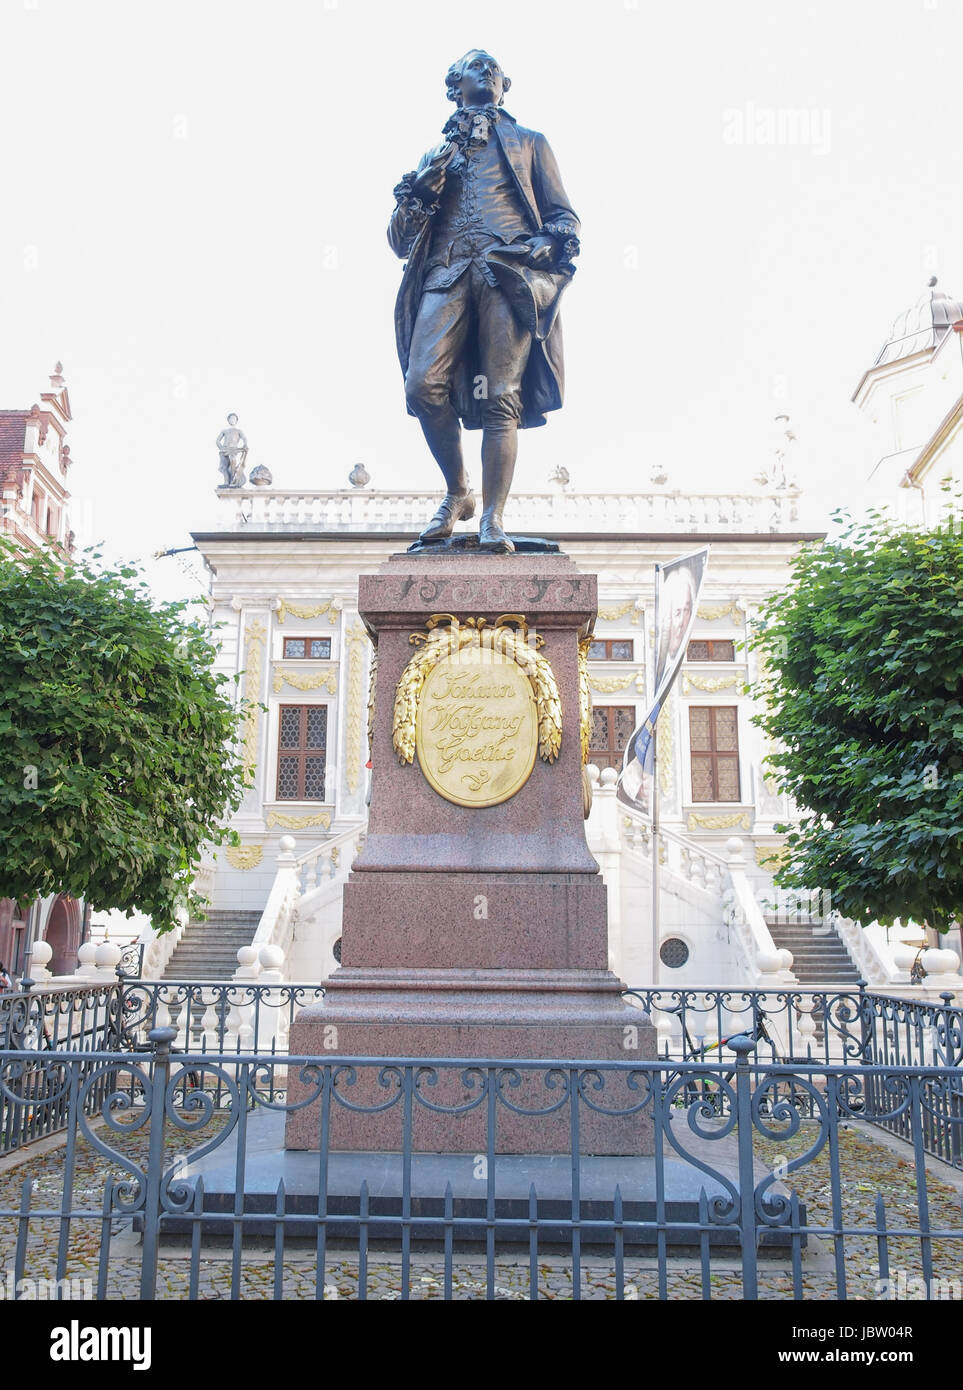 LEIPZIG, GERMANY - JUNE 12, 2014: The Goethe Denkmal monument to Dichter J W von Goethe stands in the Naschmarkt square in front of the Old Stock Exchange since 1908 Stock Photo